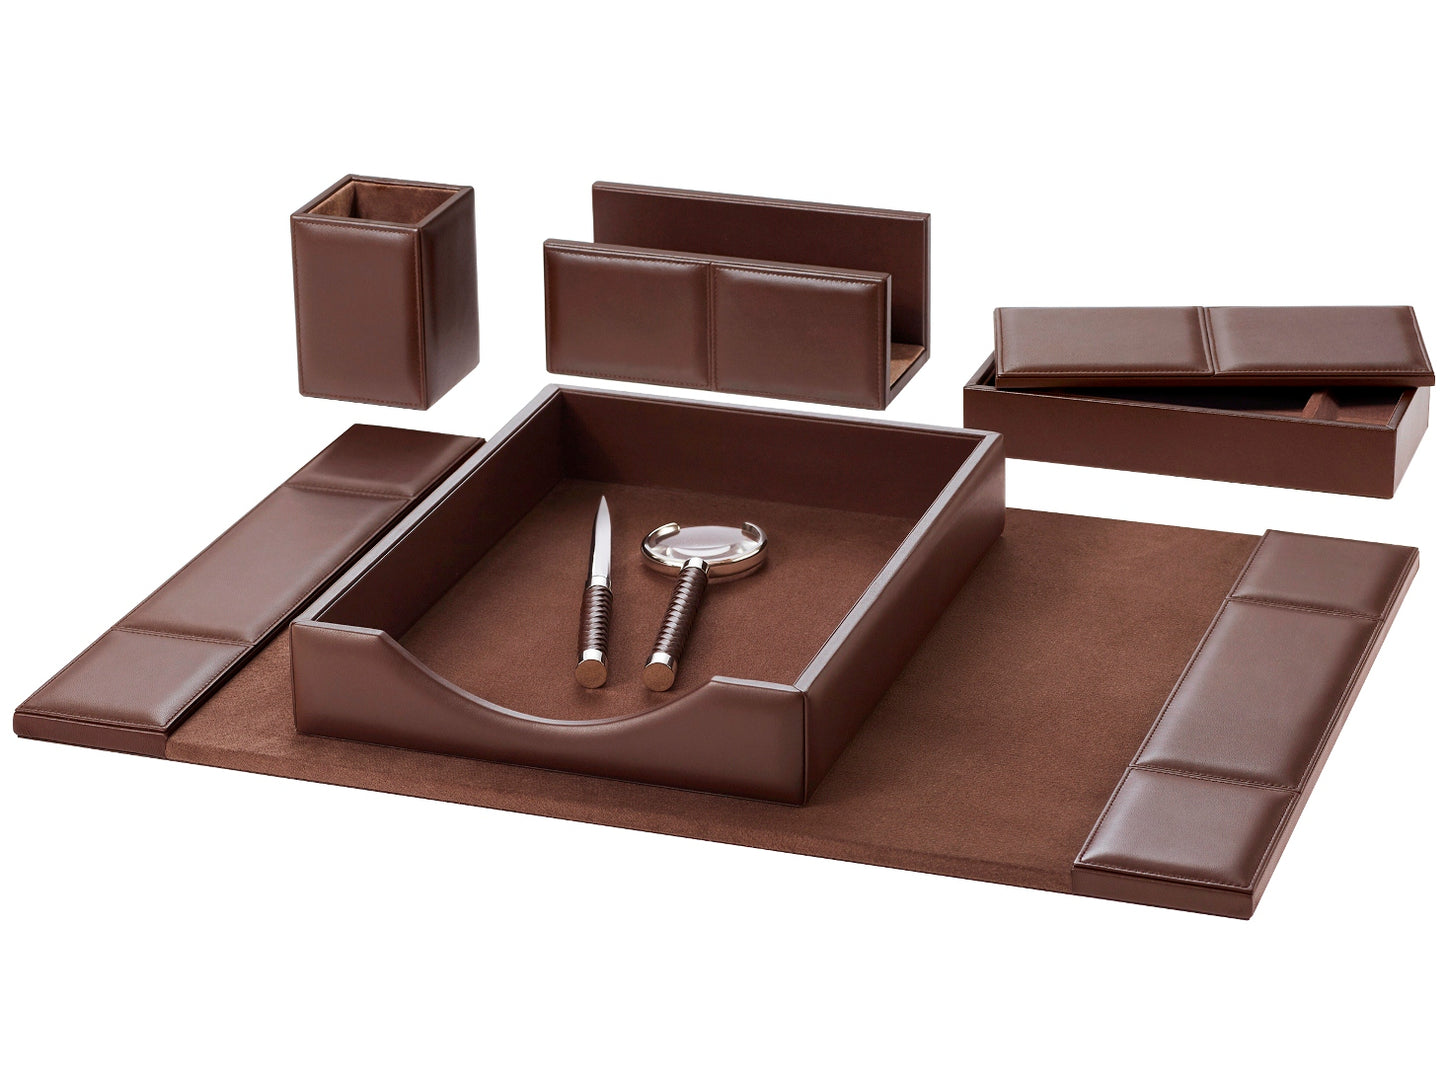 Riviere Celio Classic Leather Desk Pad | Timeless Elegance for Your Workspace | Crafted with Fine Leather | Enhance Your Desk with Luxury Accessories from Riviere | Available at 2Jour Concierge, #1 luxury high-end gift & lifestyle shop